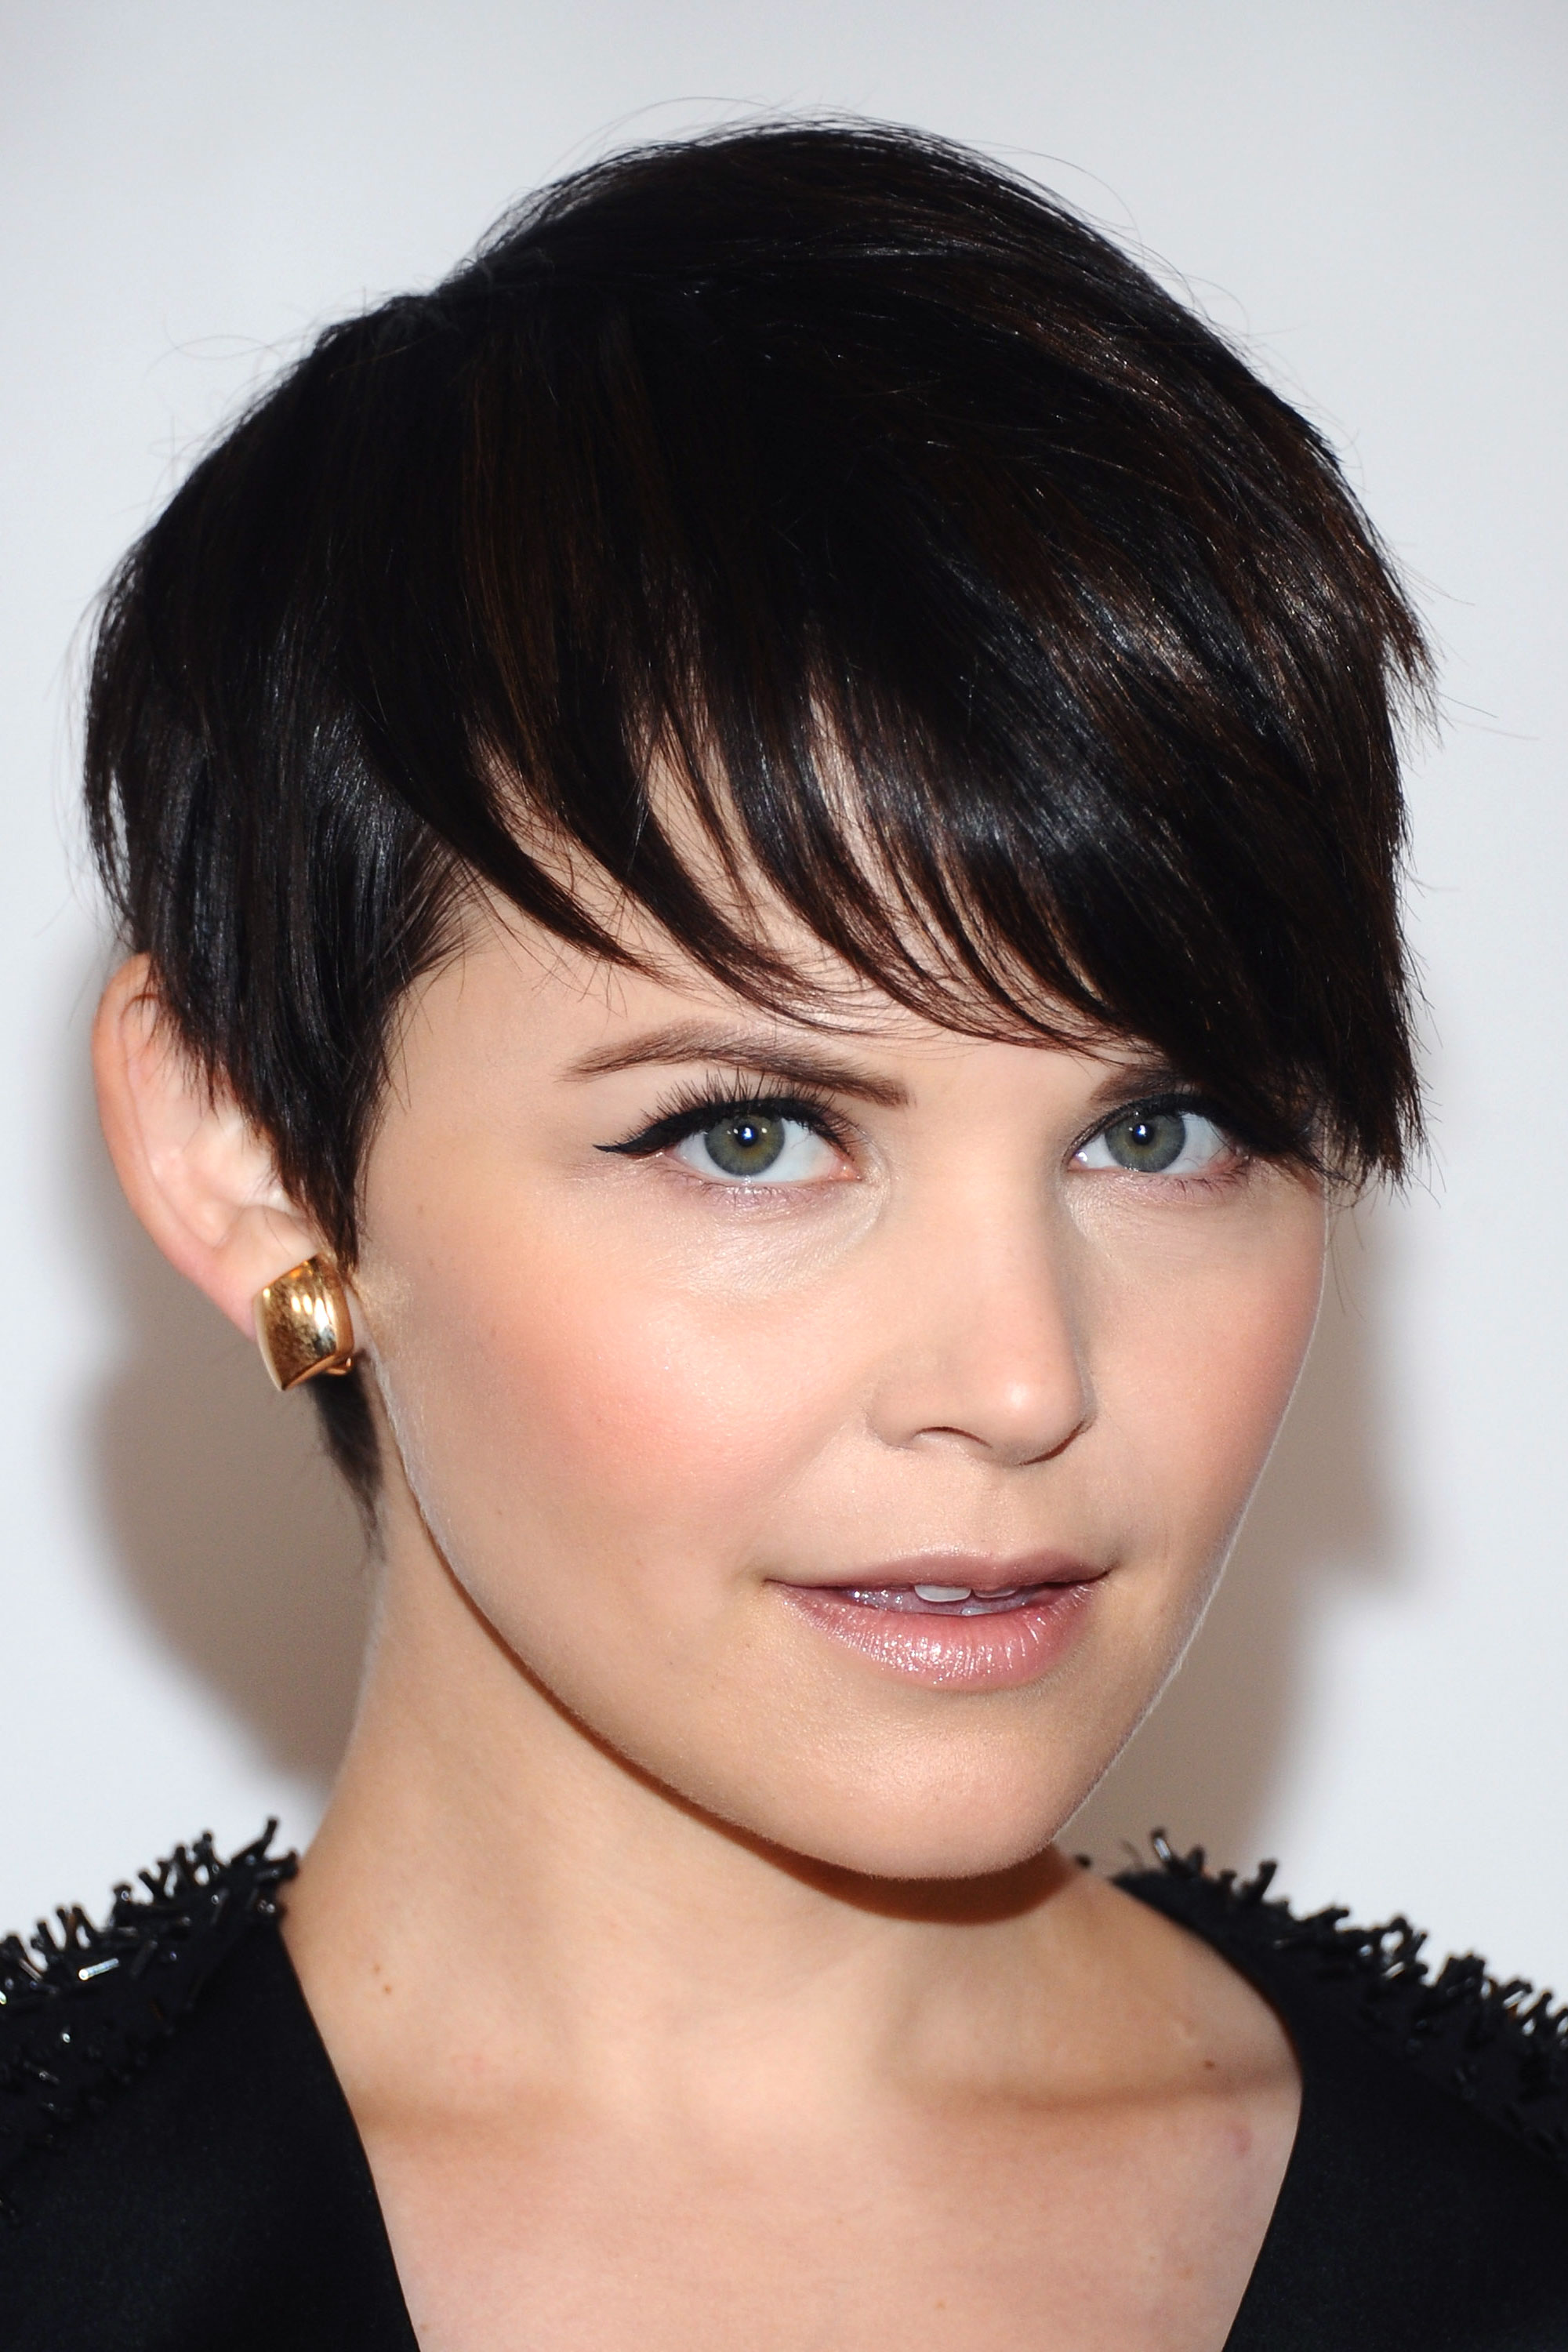 79 Hairstyles and Cuts to Make Thin Hair Look Thicker